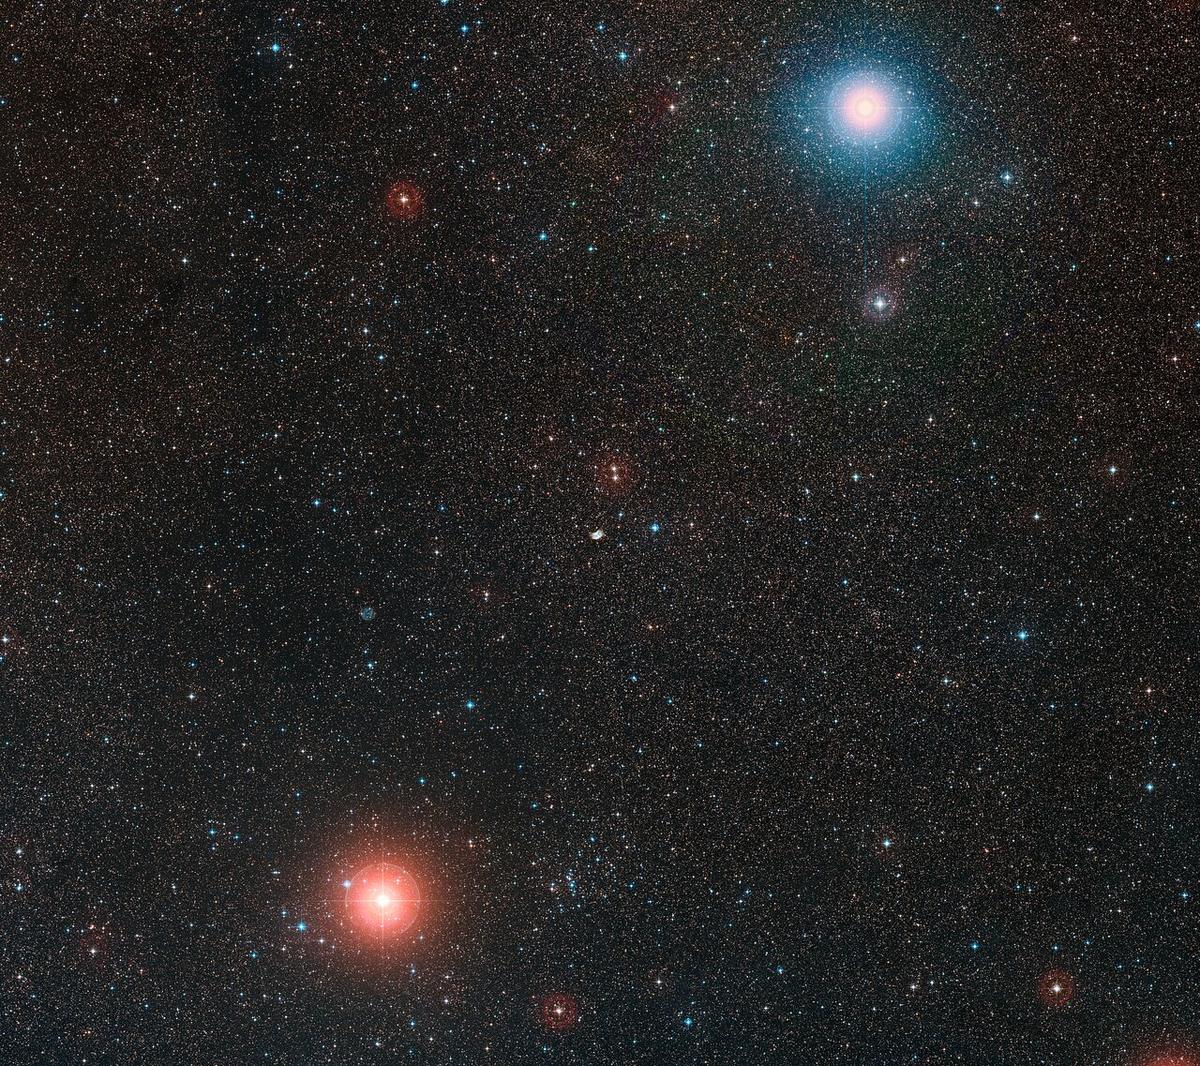 This image shows the sky around the location of NGC 2899, which is visible at the very center of the frame. This picture was created from images in the Digitized Sky Survey 2. (Courtesy of <a href="https://www.eso.org/public/images/eso2012c/">ESO/Digitized Sky Survey 2</a>)